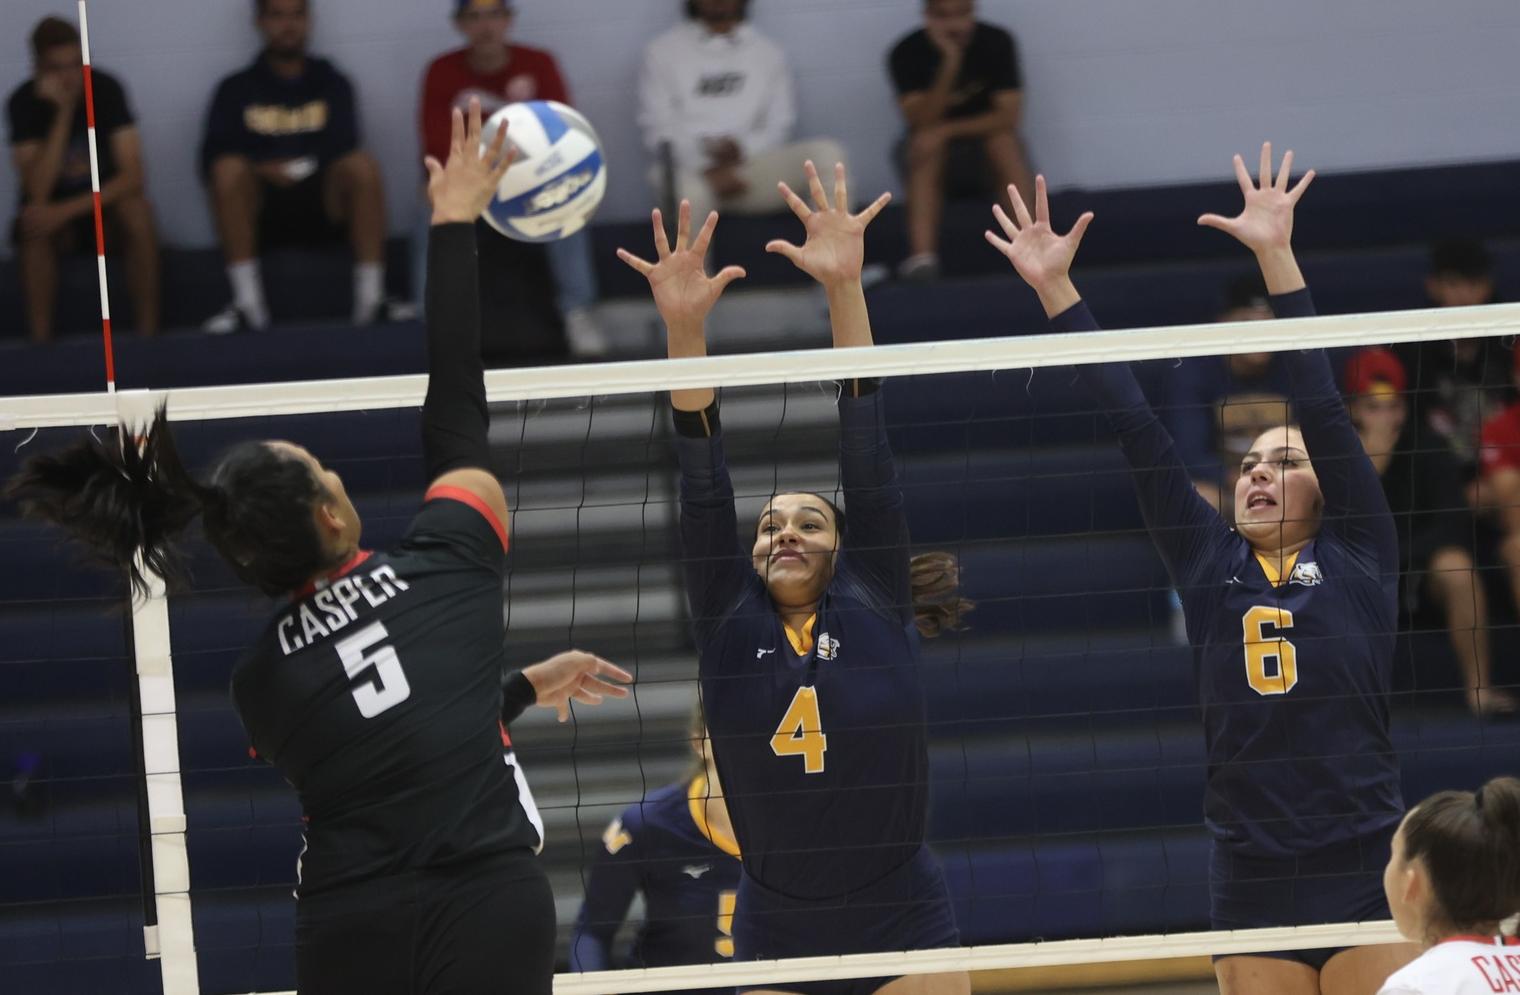 Shanelle Martinez and Alex Hernandez go up for a block.